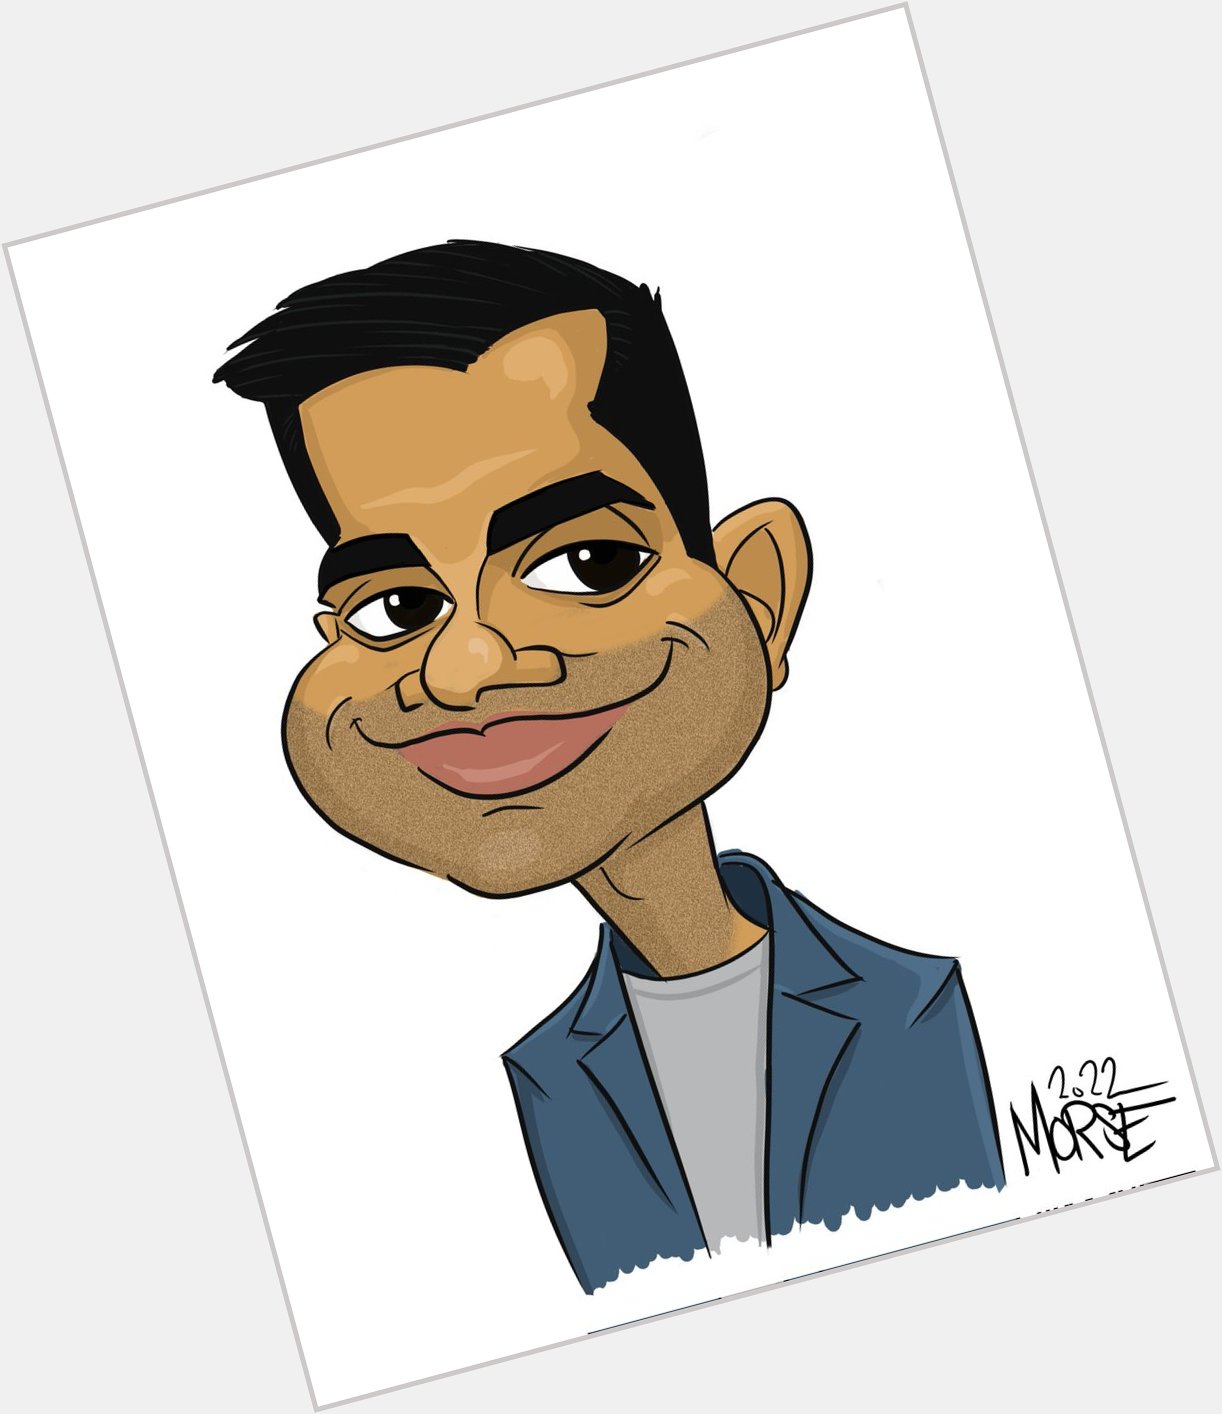 Happy Birthday to Aziz Ansari! Hey, who wants a caricature? Message me!  